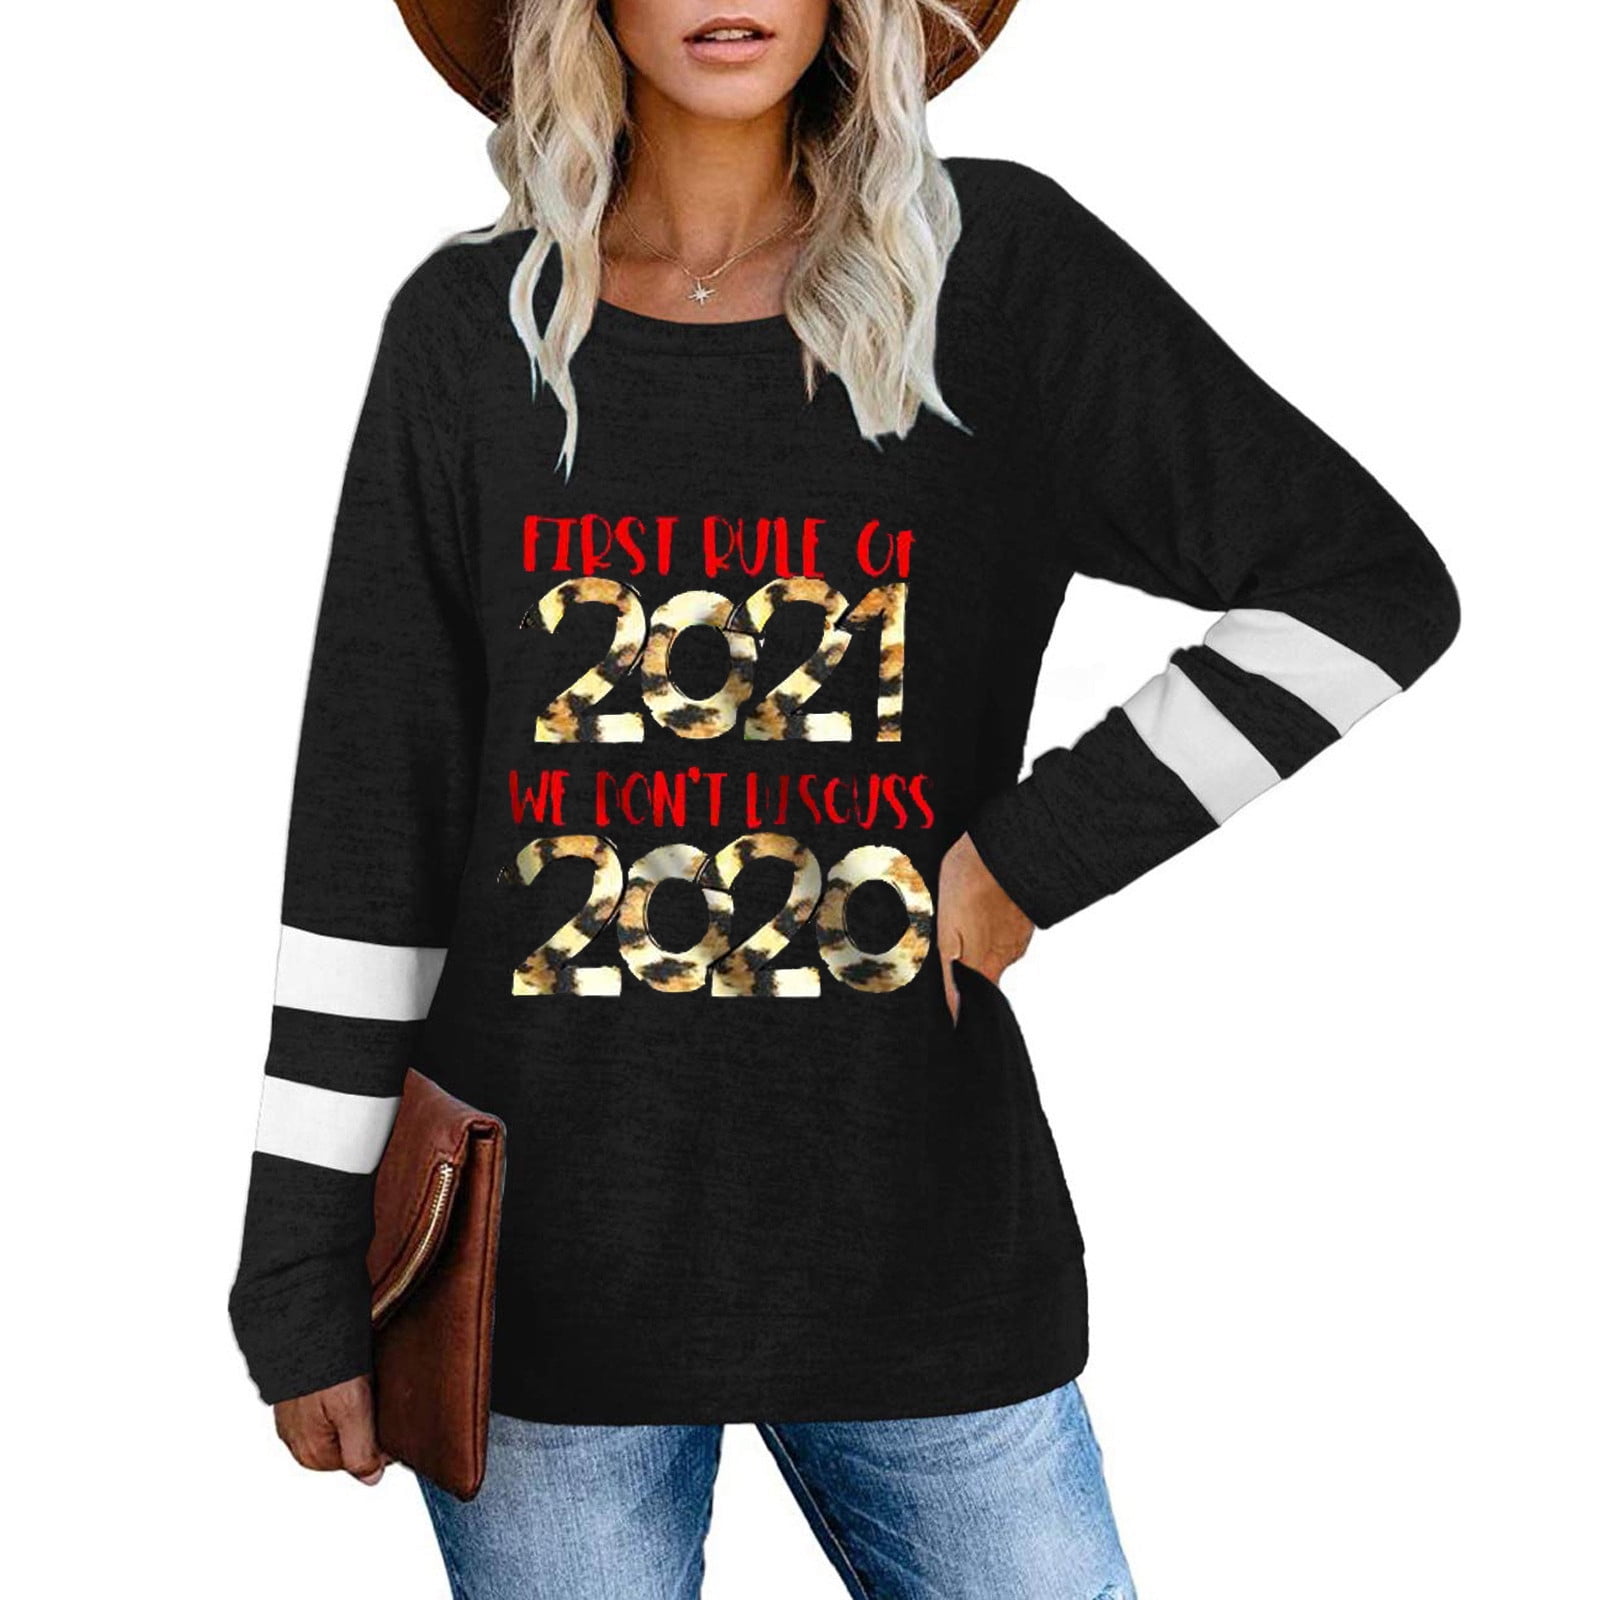 Hoodies for Women,Women Letter Printing Stripe Round Collar Long Sleeves Sweater Tops